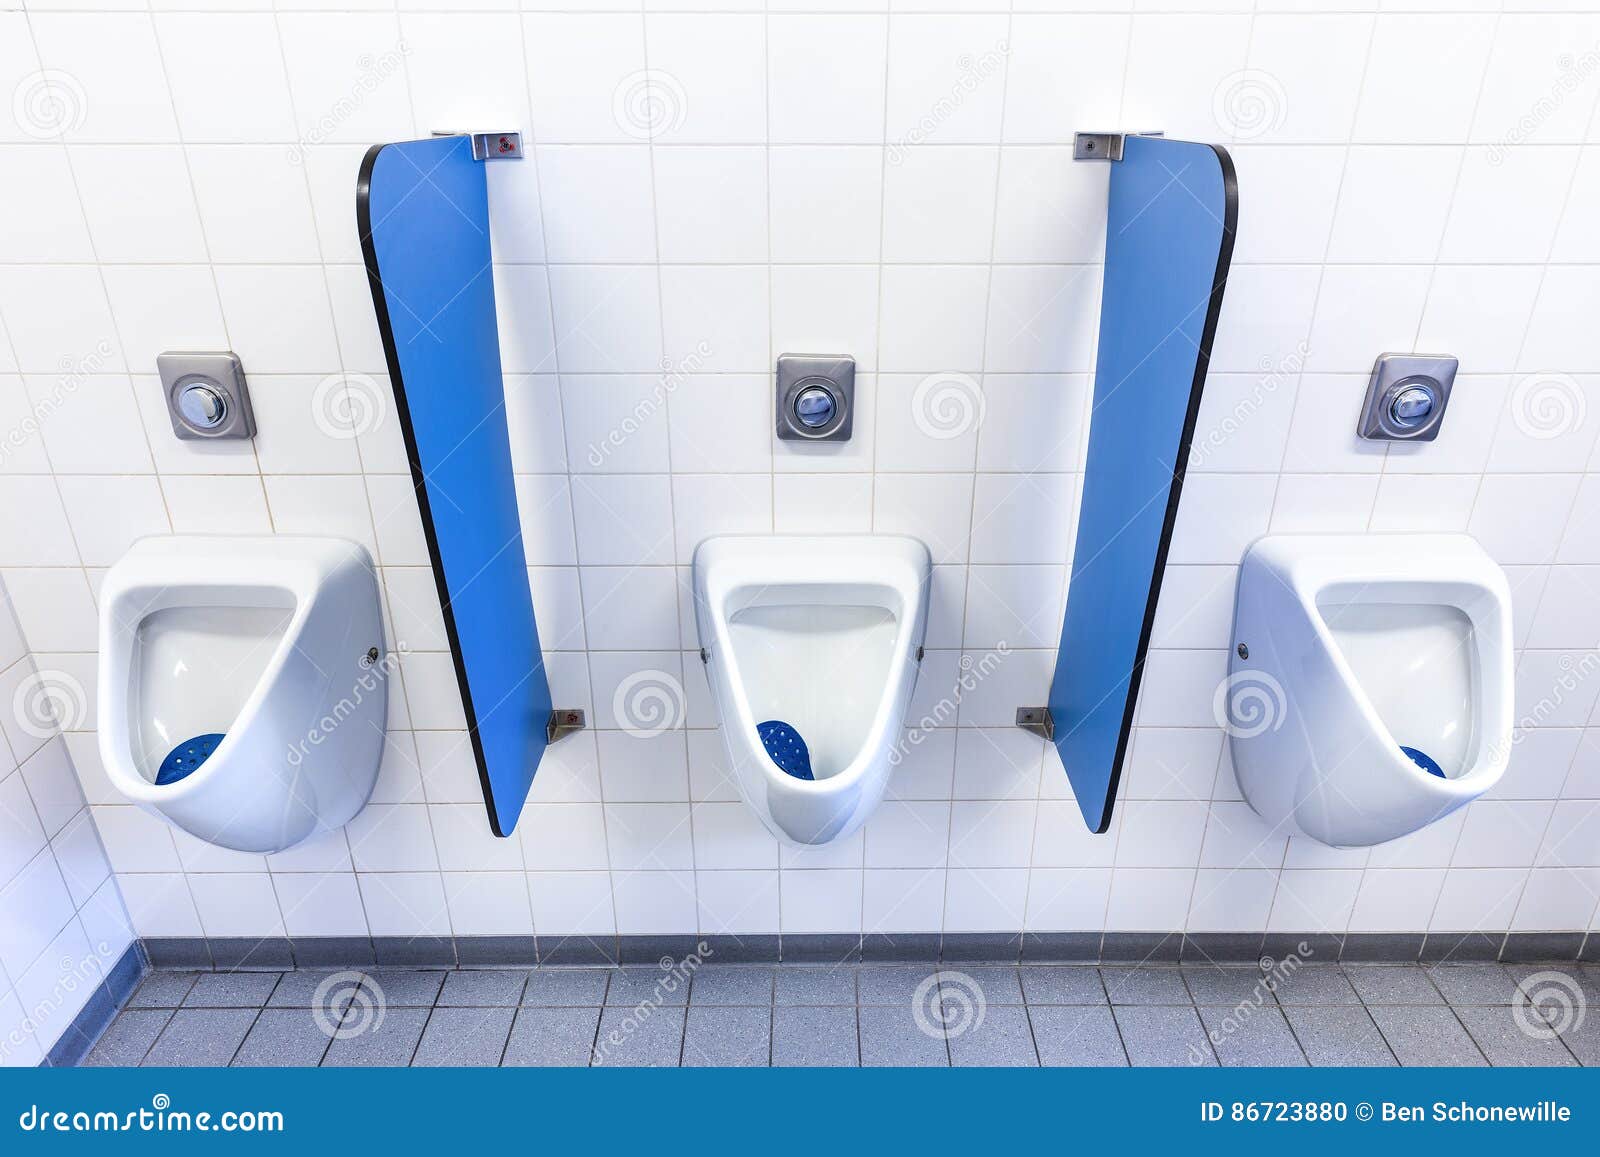 urinals for men on white wall with blue partitions